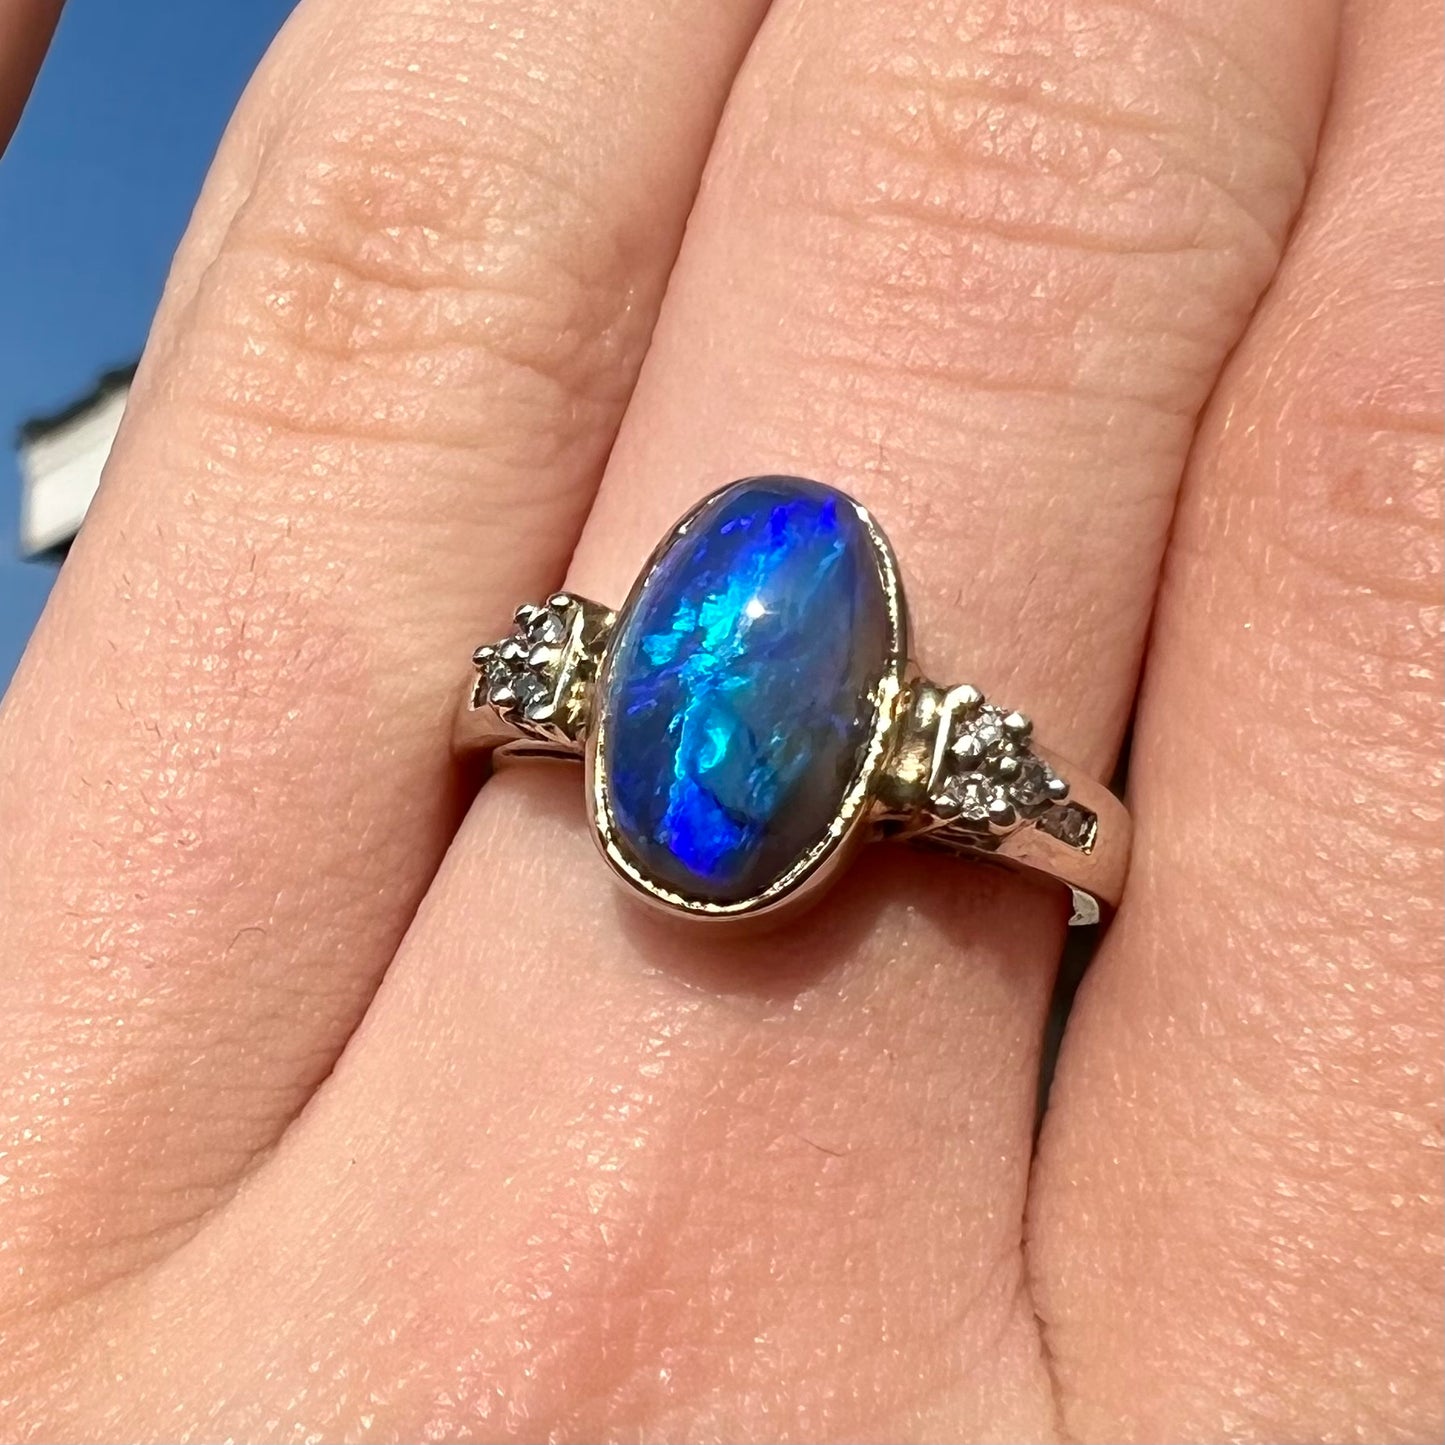 A white gold ring set with a Lightning Ridge black opal and diamond accents.  The opal displays a cat's eye pattern.